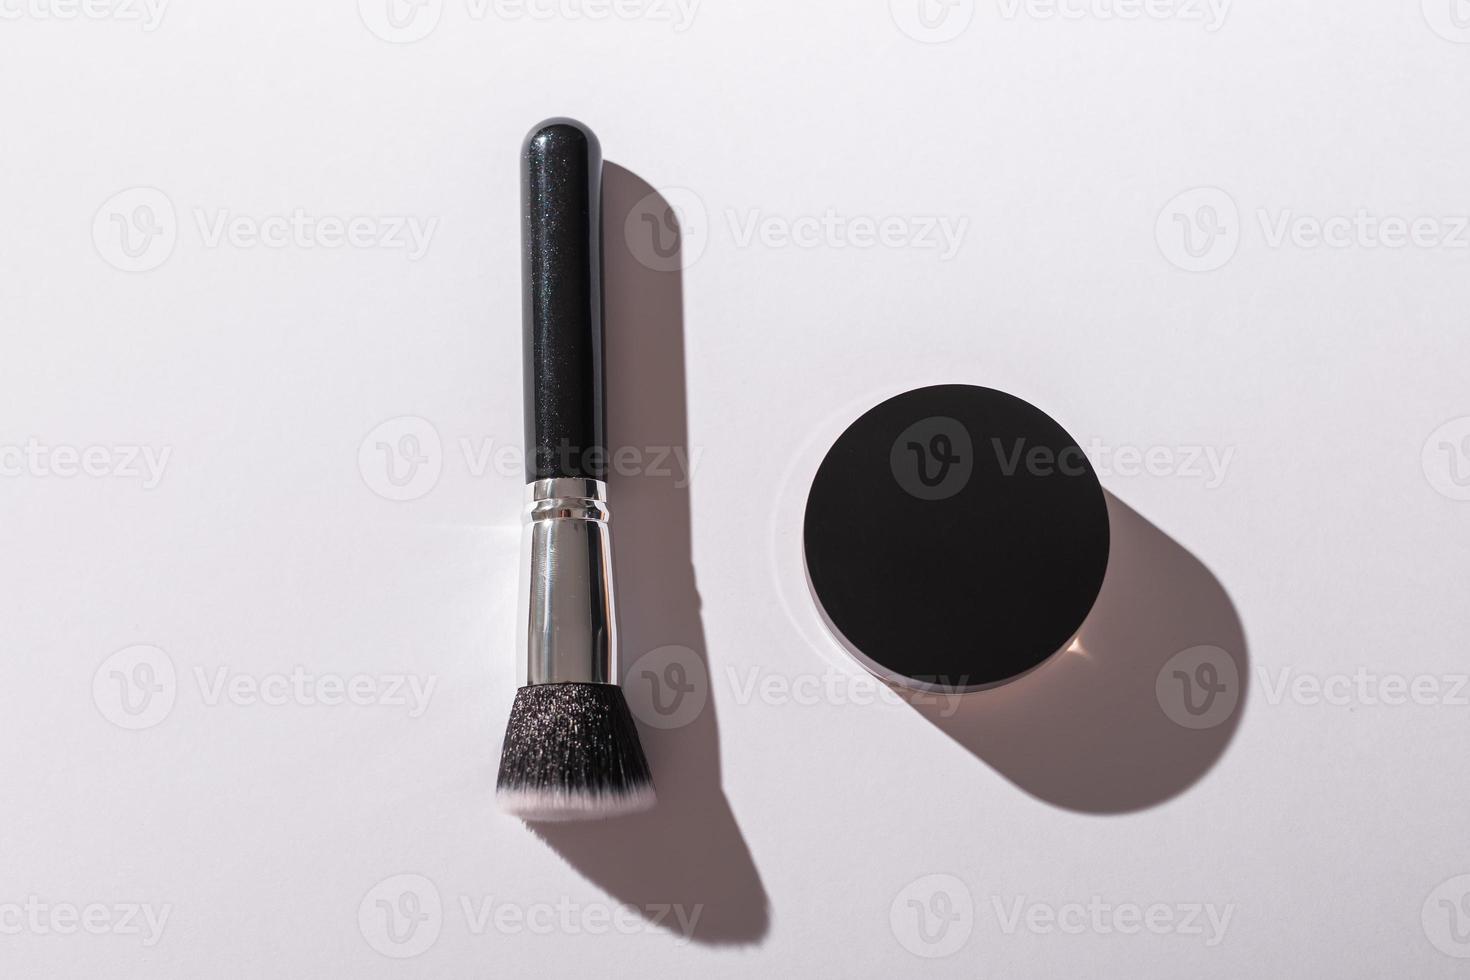 Mineral face powder and brush. Eco-friendly and organic beauty products photo